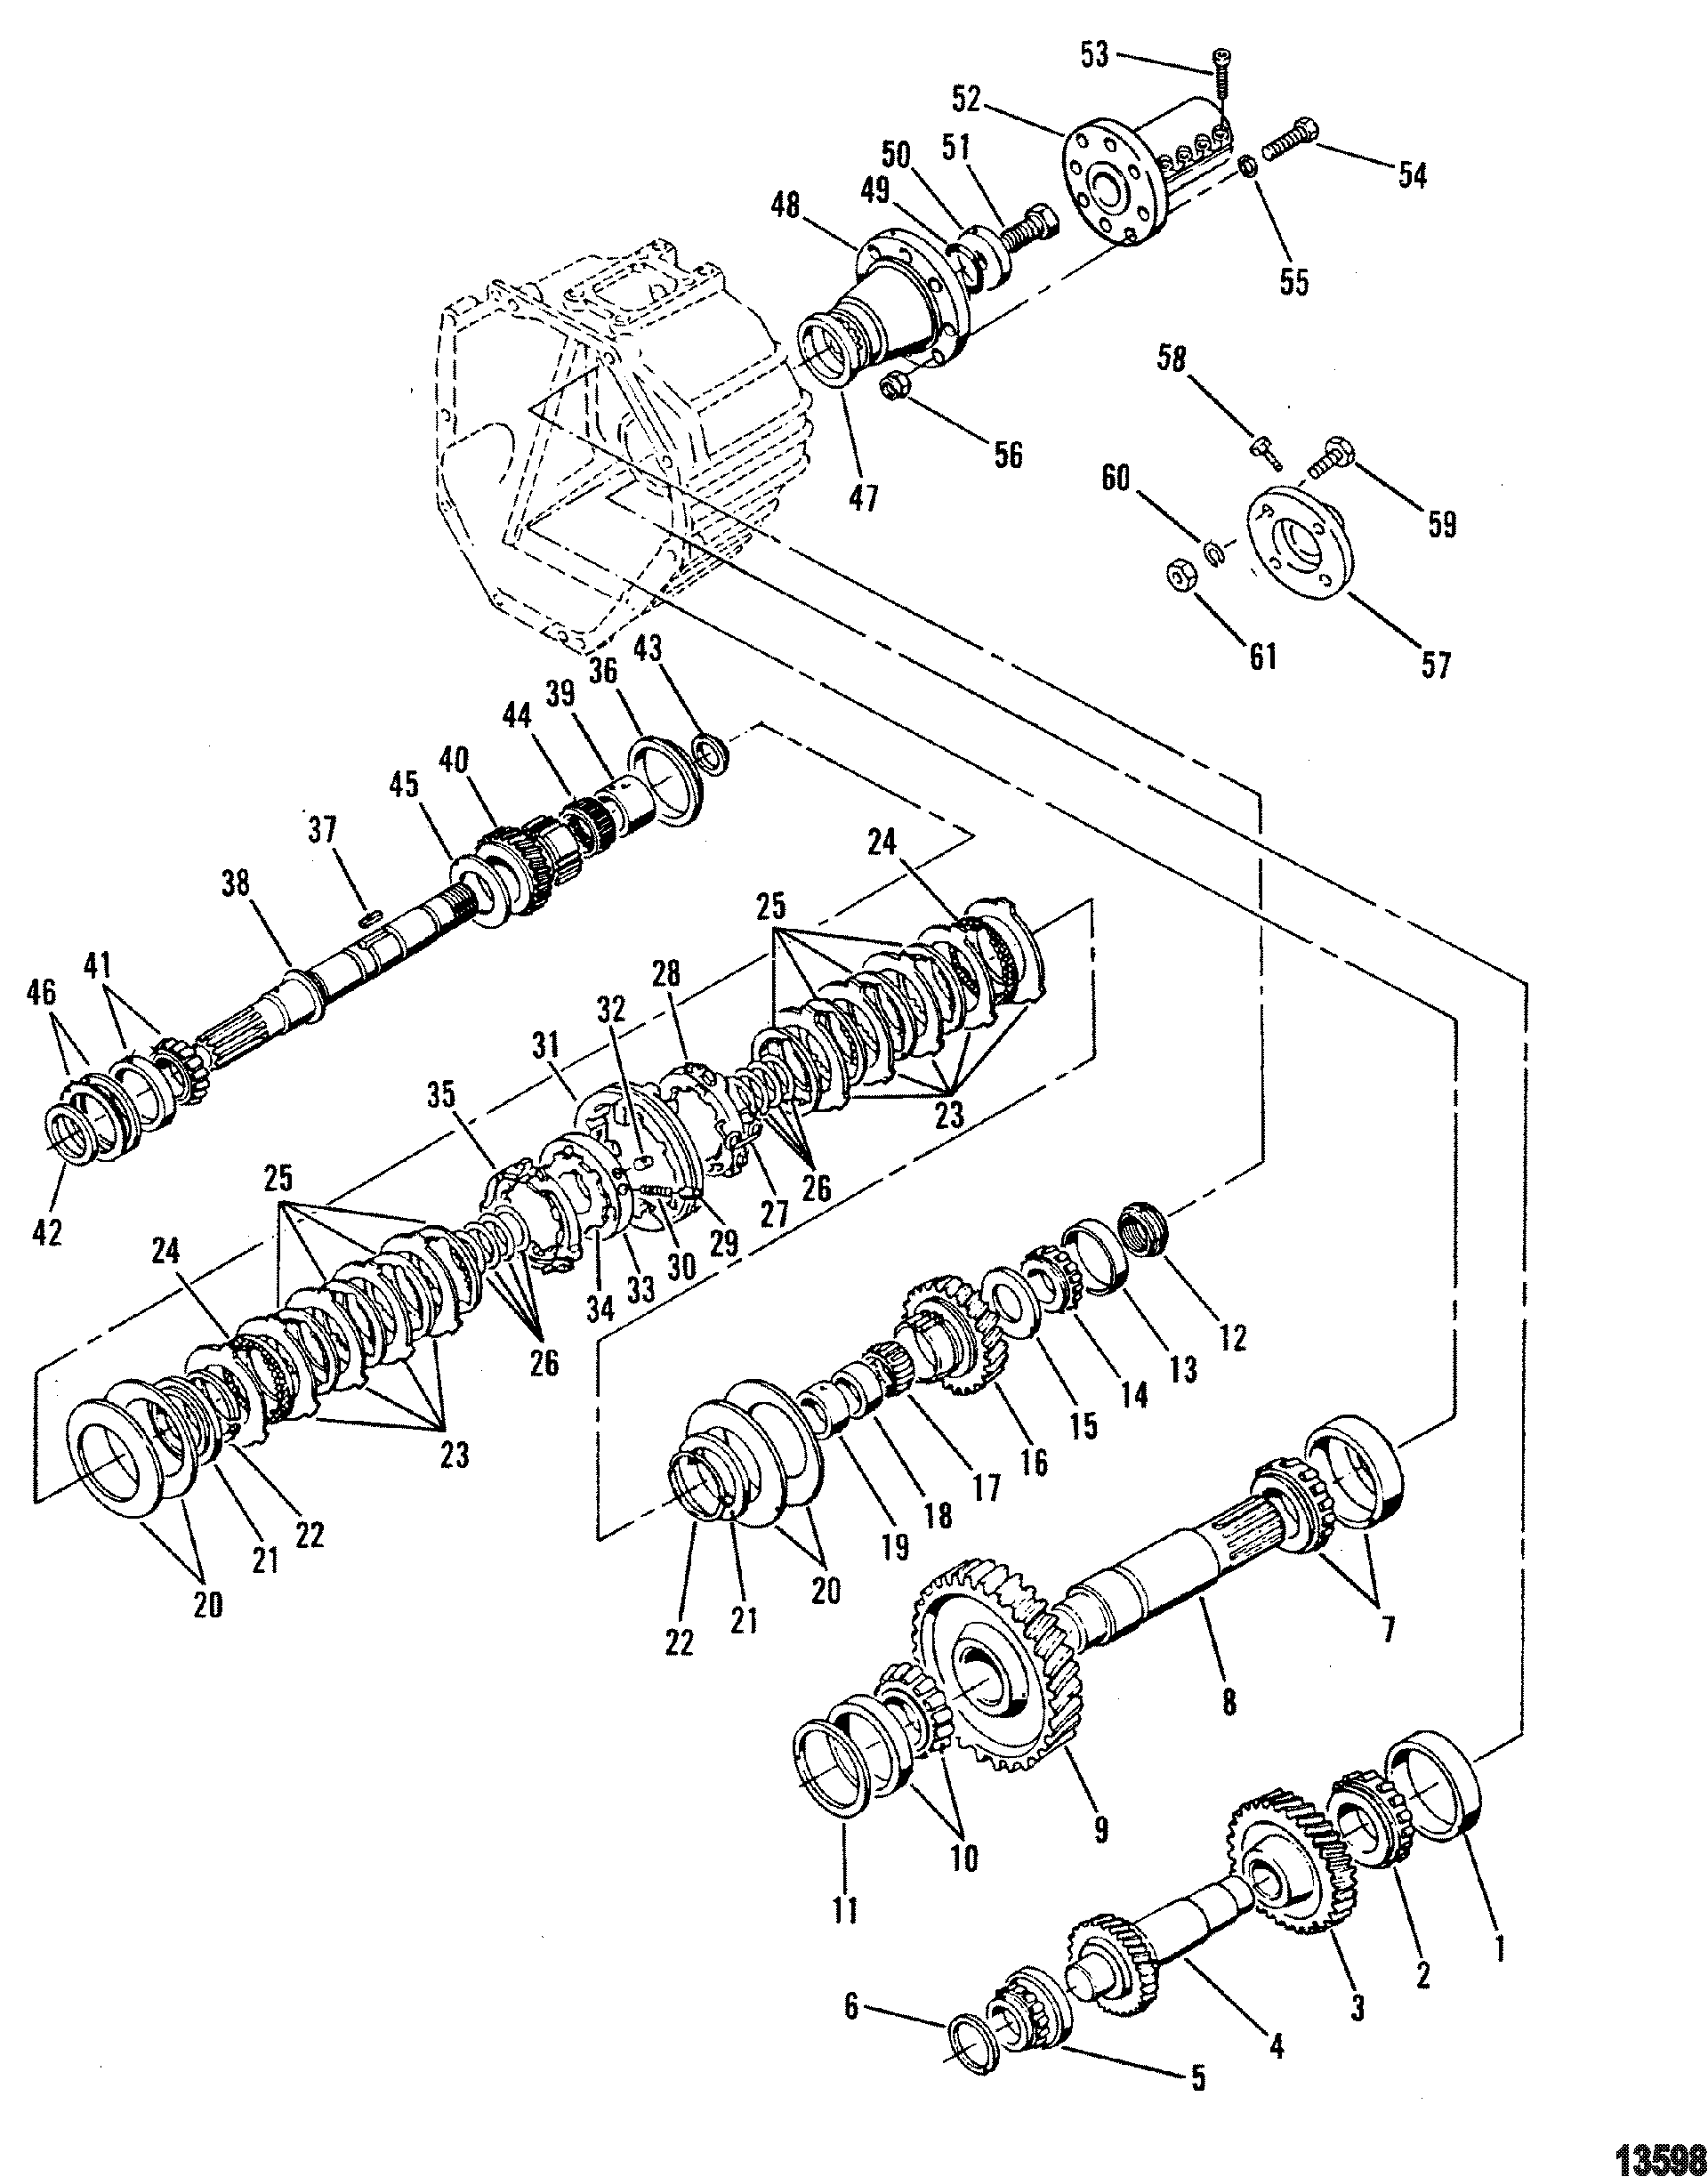 Transmission(Inline) (Internal Component) Continued